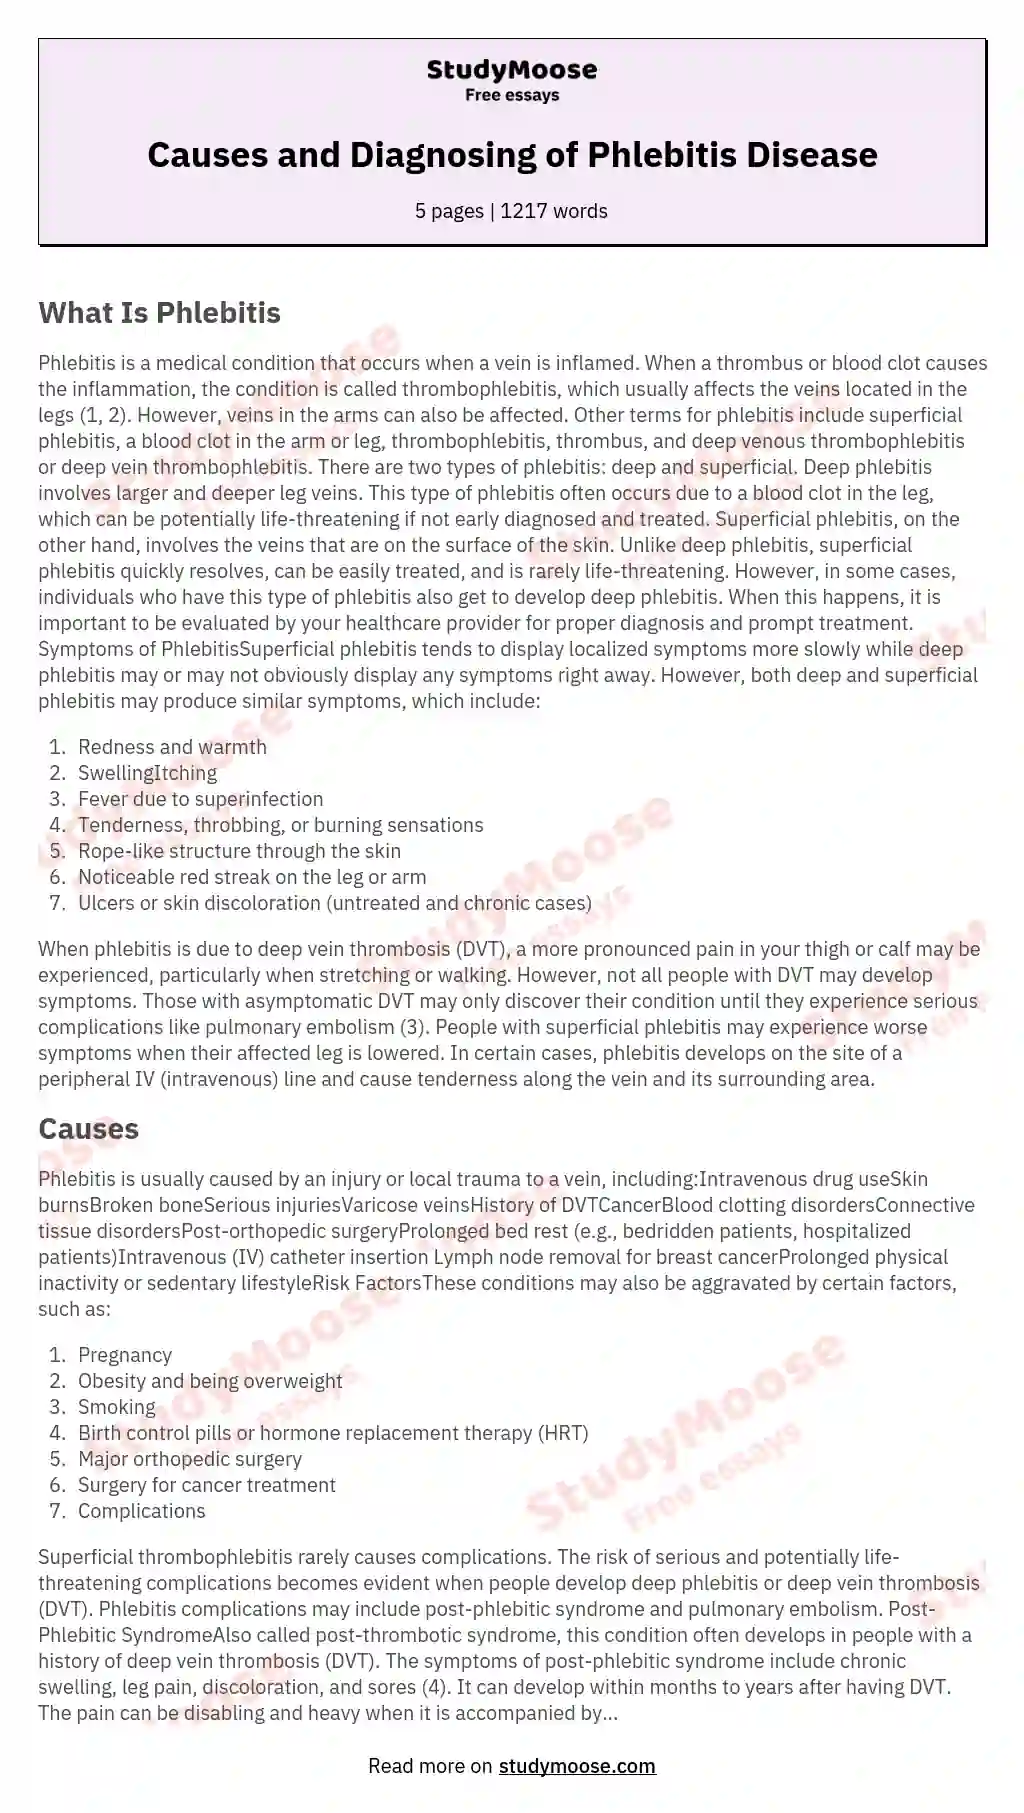 Causes and Diagnosing of Phlebitis Disease essay